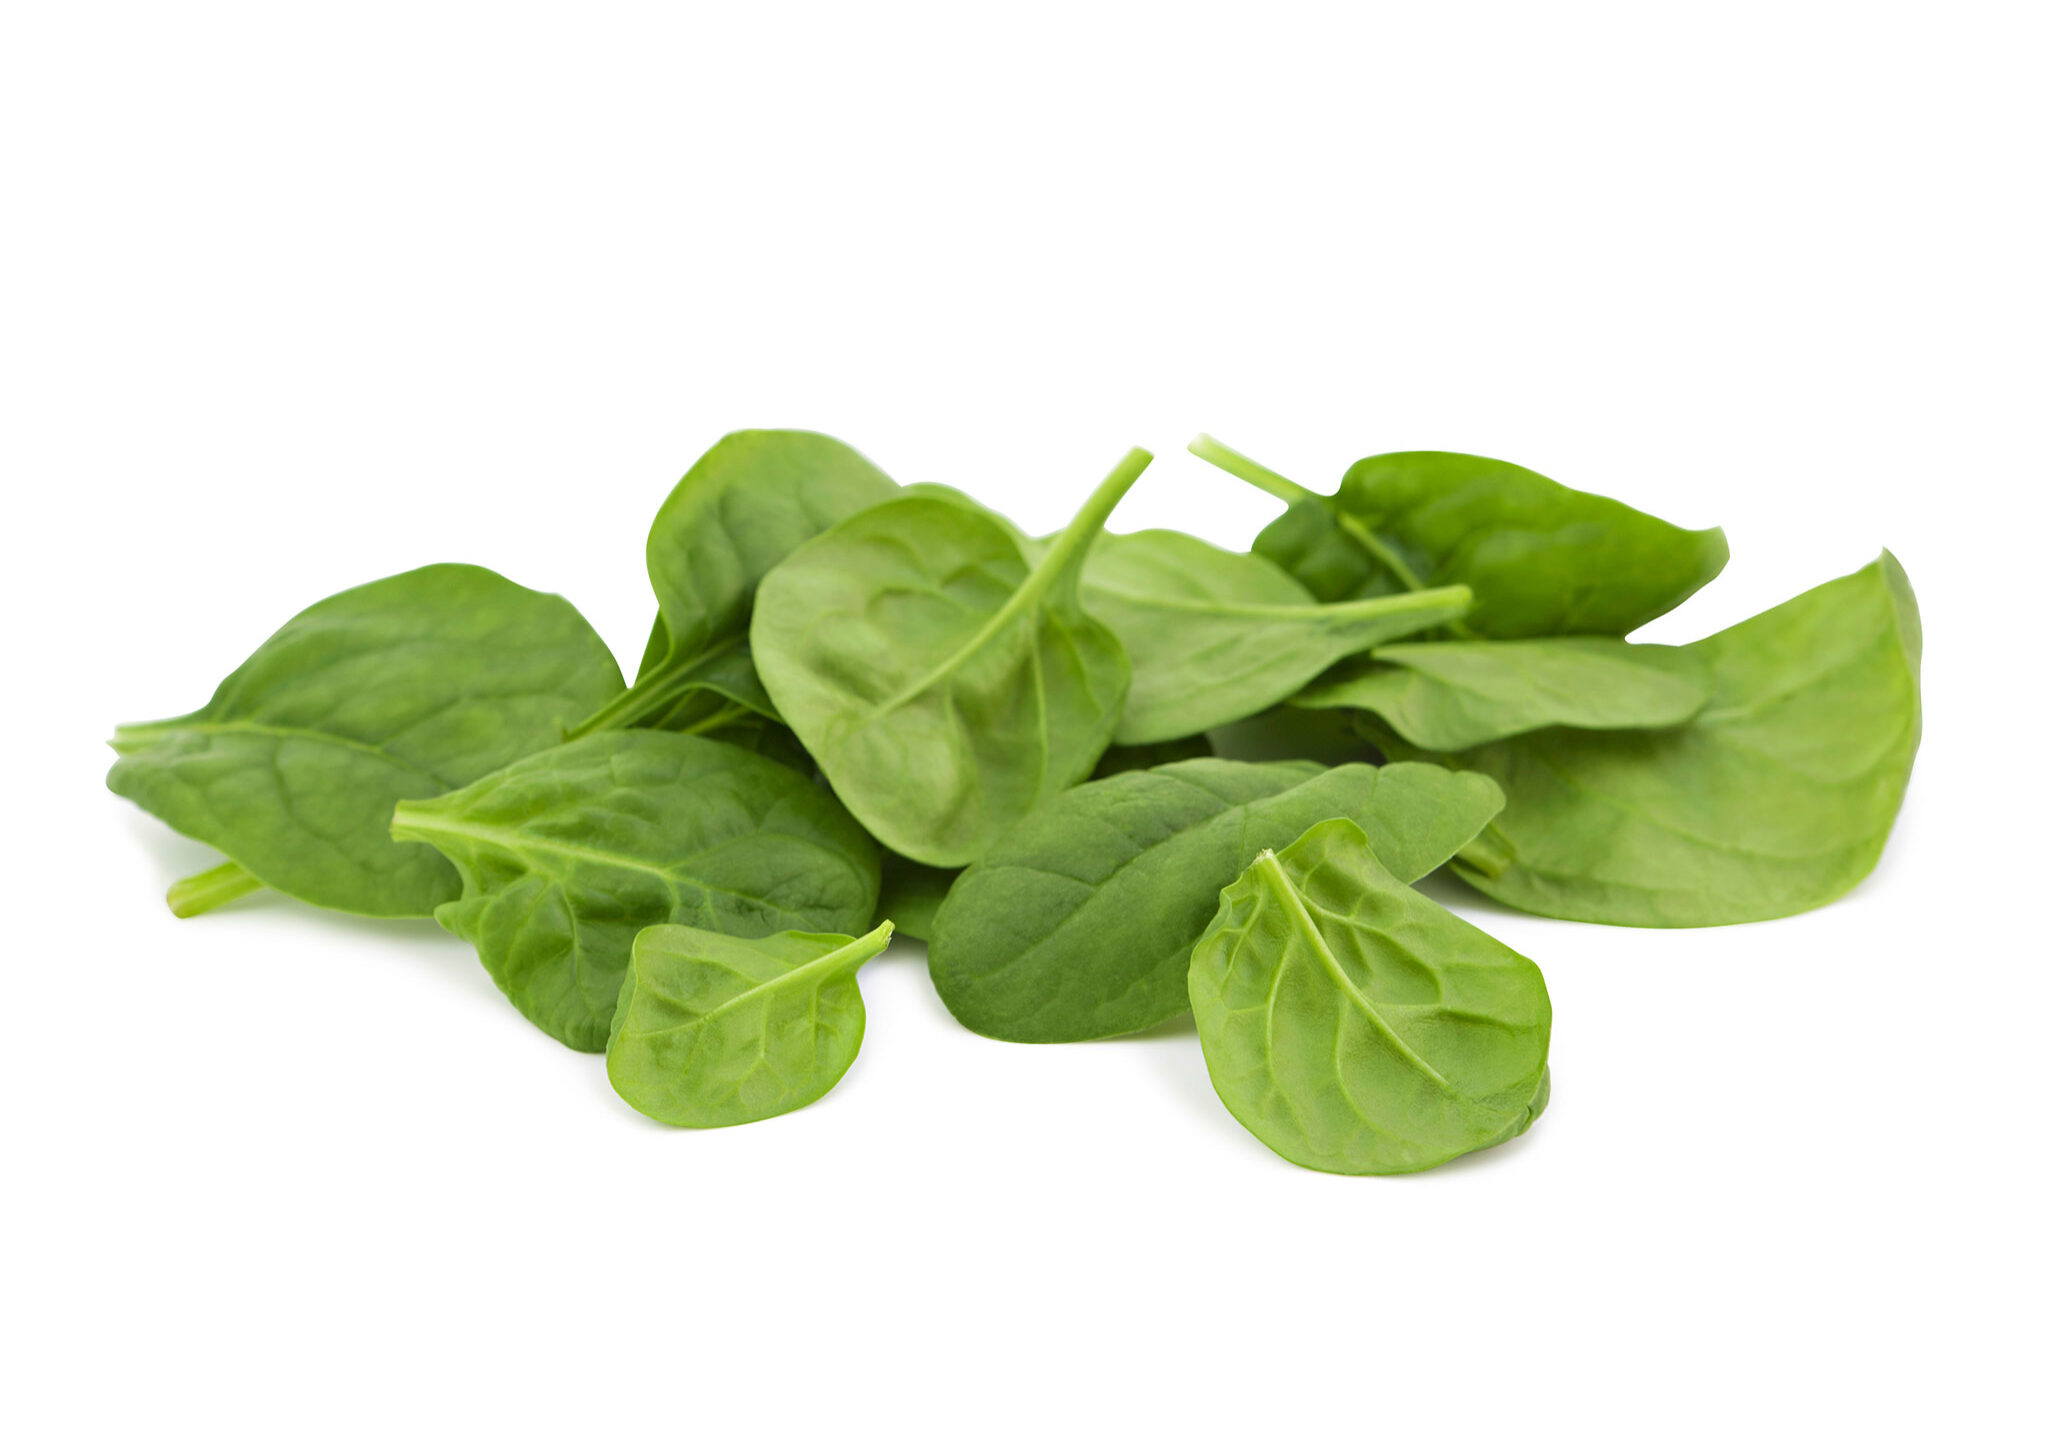 FNM_040114-WhichIsHealthier-spinach_s4x3